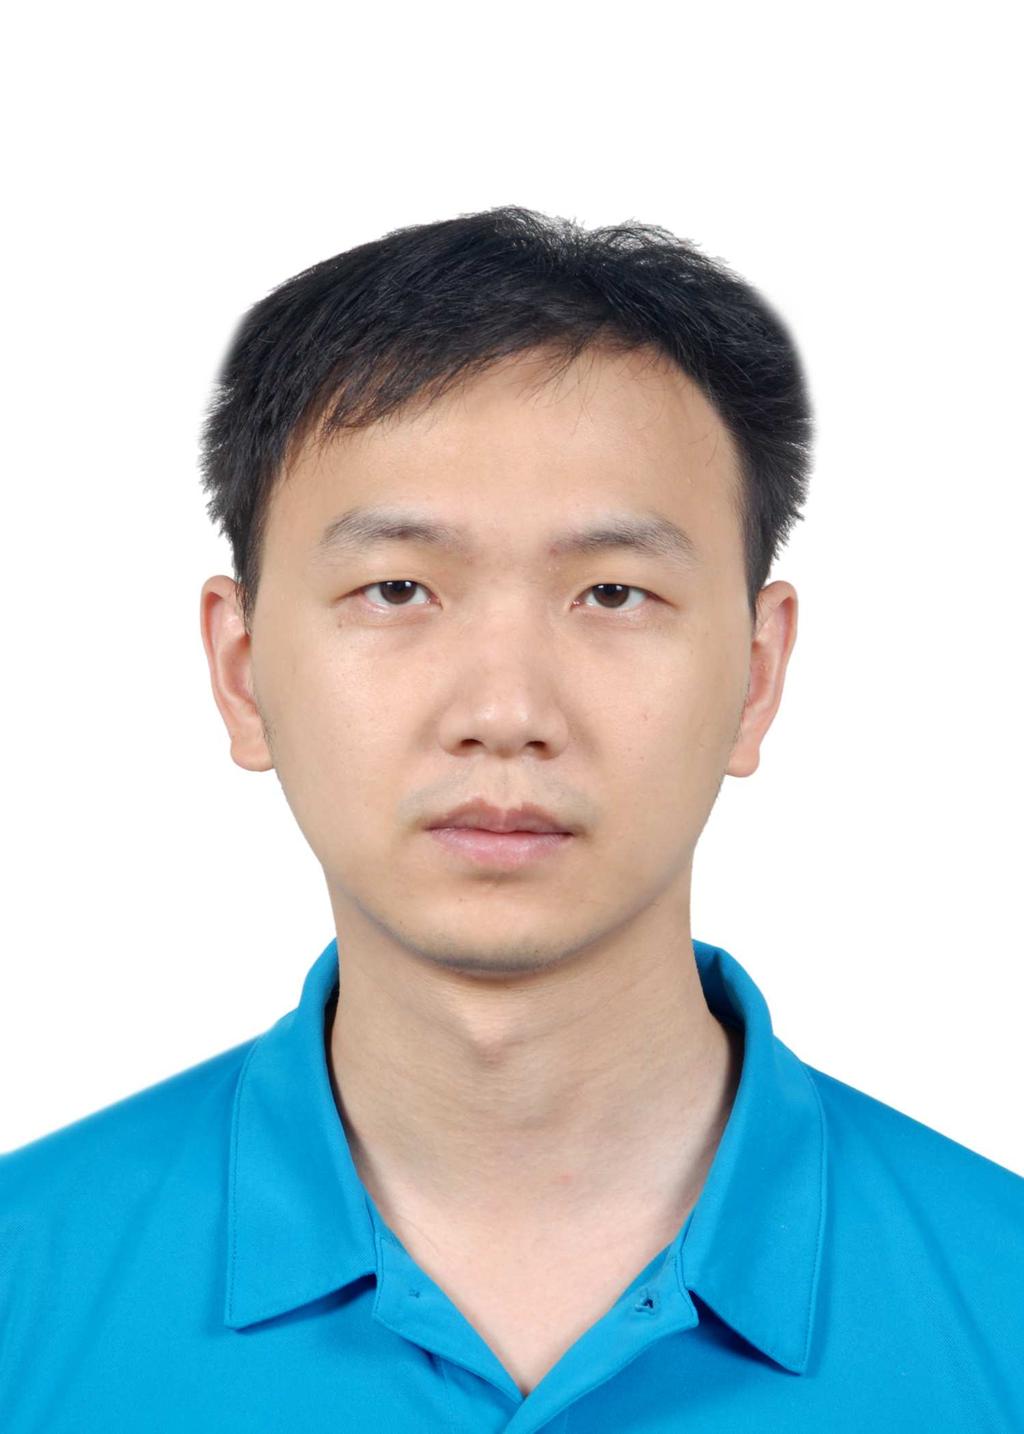 424 Z. Tang, T. Peng: A Wideband Spectrum Data Compression Algorithm base on... Tang Zhoujin is currently a Ph.D. candidate at Beijing University of Posts and Telecommunications (BUPT), Beijing, China.